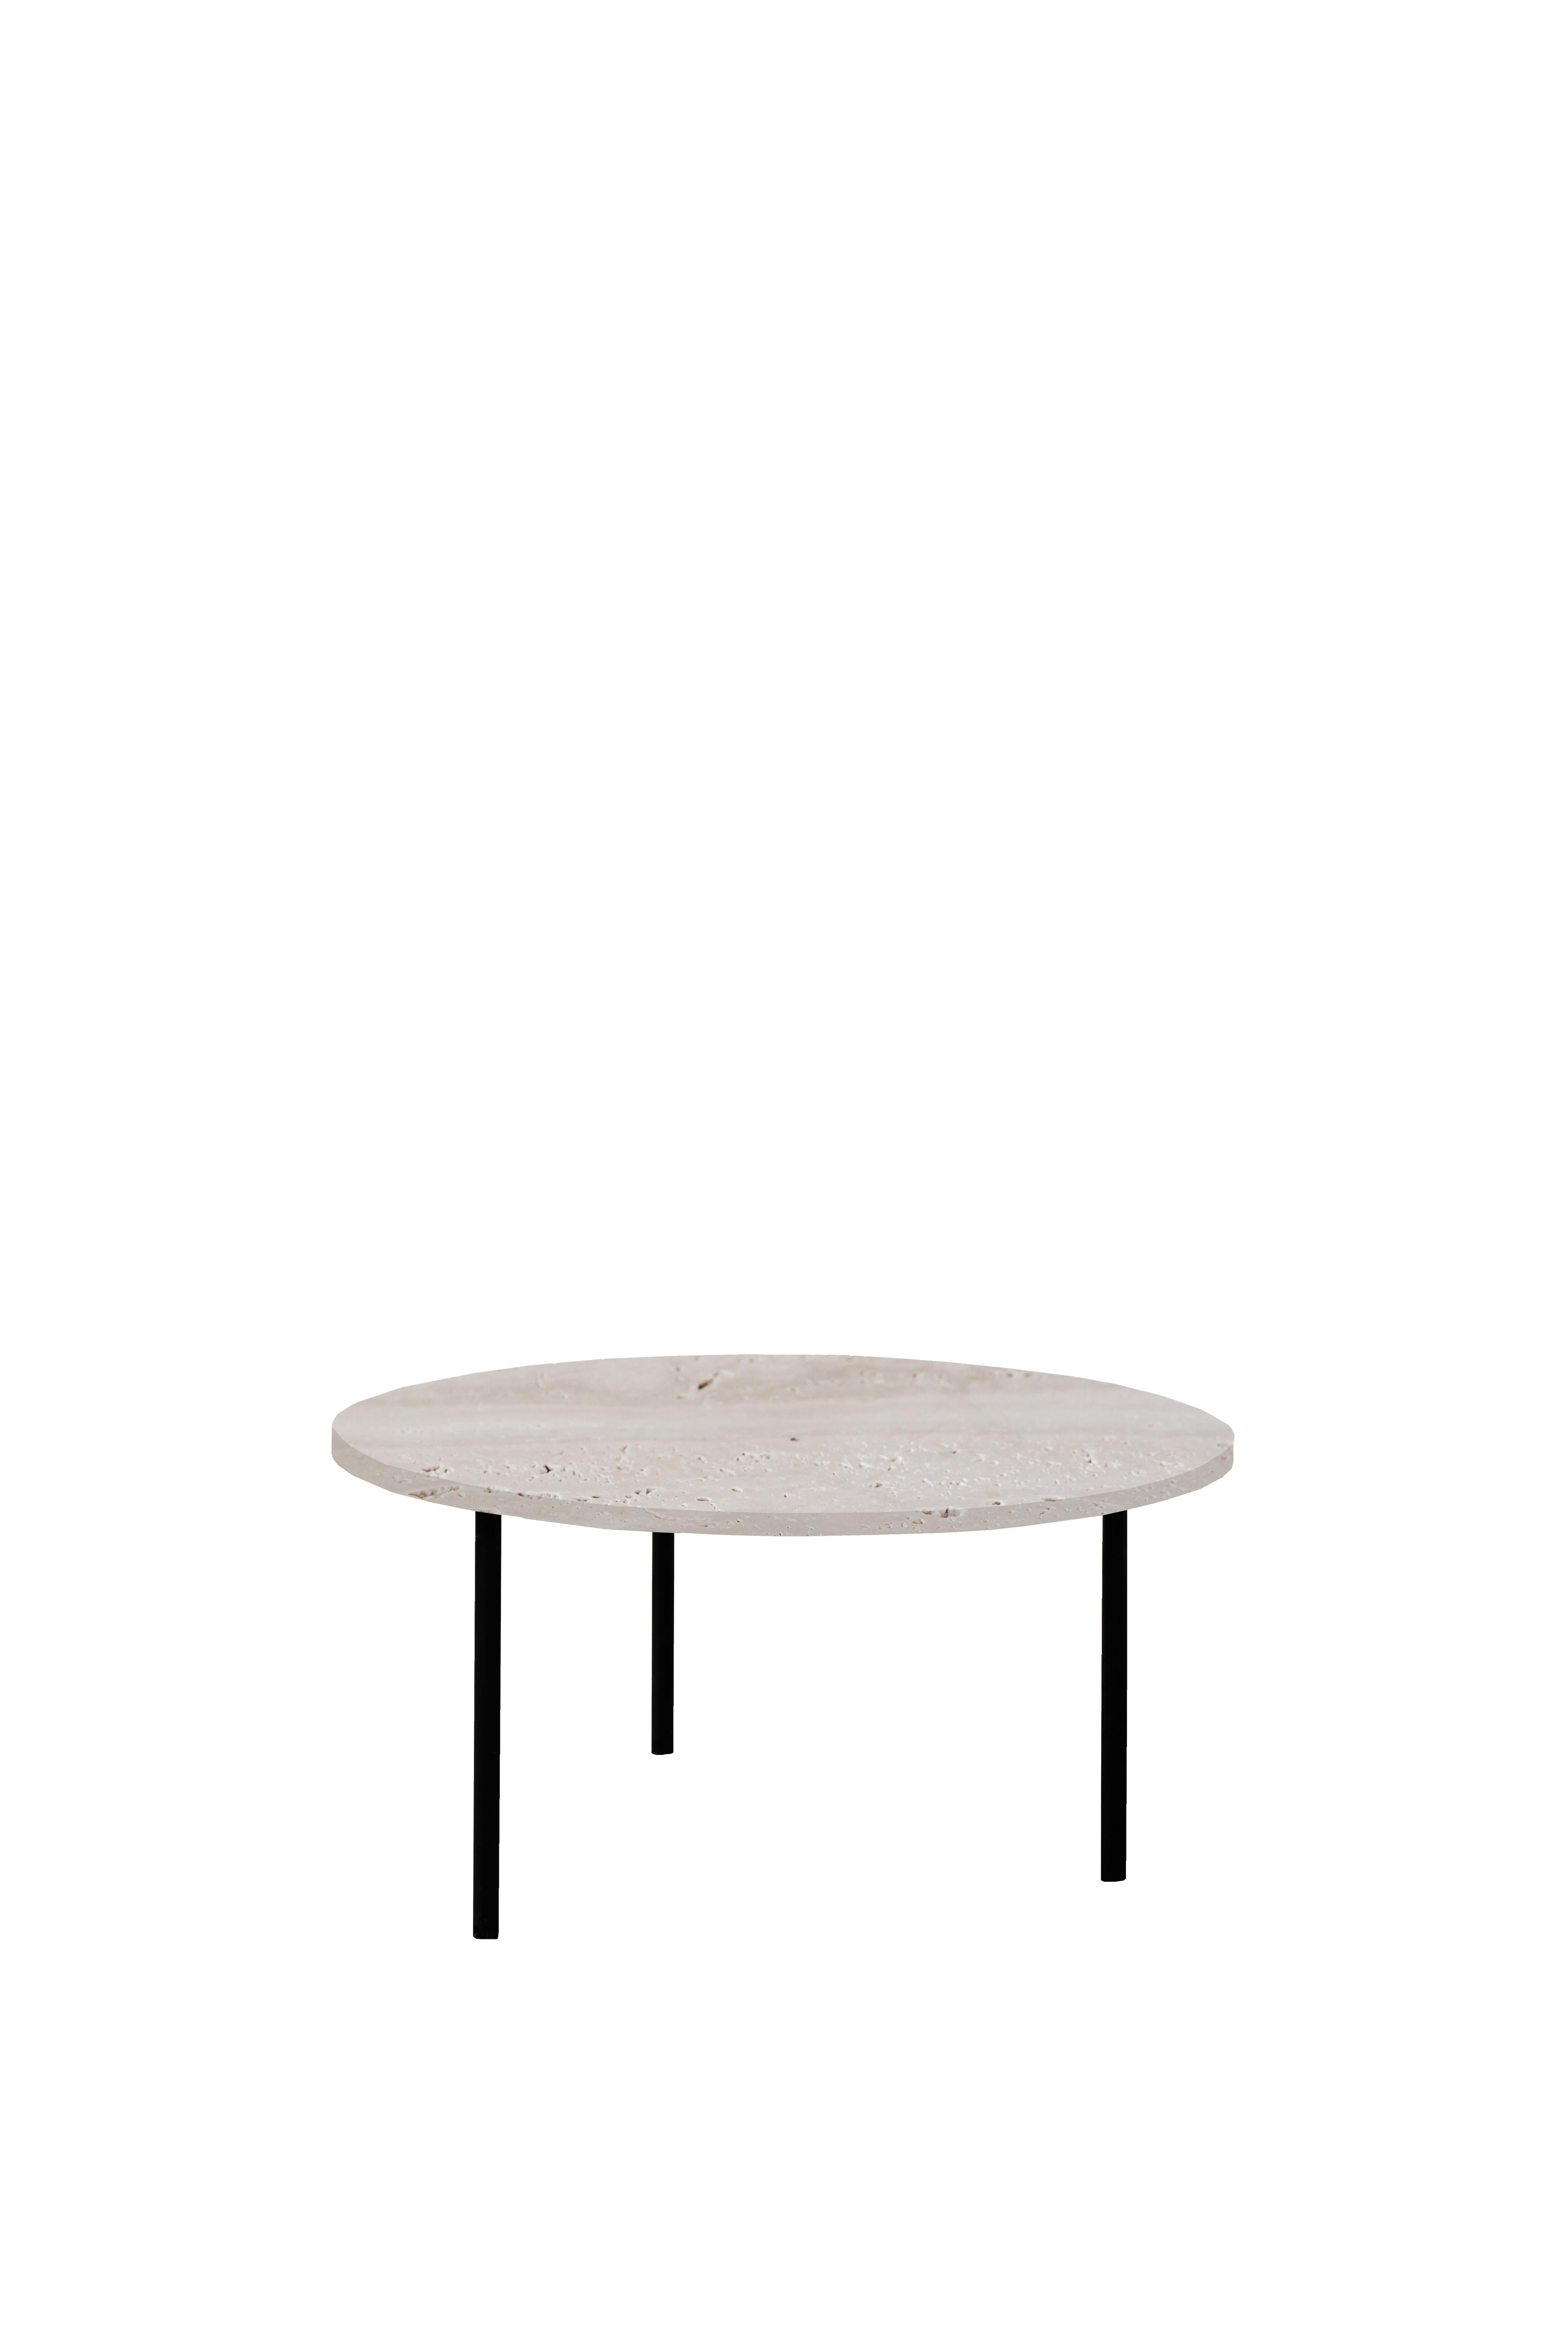 Gruff Travertine M coffee table by Un’common
Dimensions: D 70 x H 35 cm 
Materials: Travertine
Available in 3 sizes: D 45 x H 45, D 70 x H 35, D 90 x H 30 cm. 

GRUFF Travertine M is a beautiful coffee table. Tables of the GRUFF Travertine